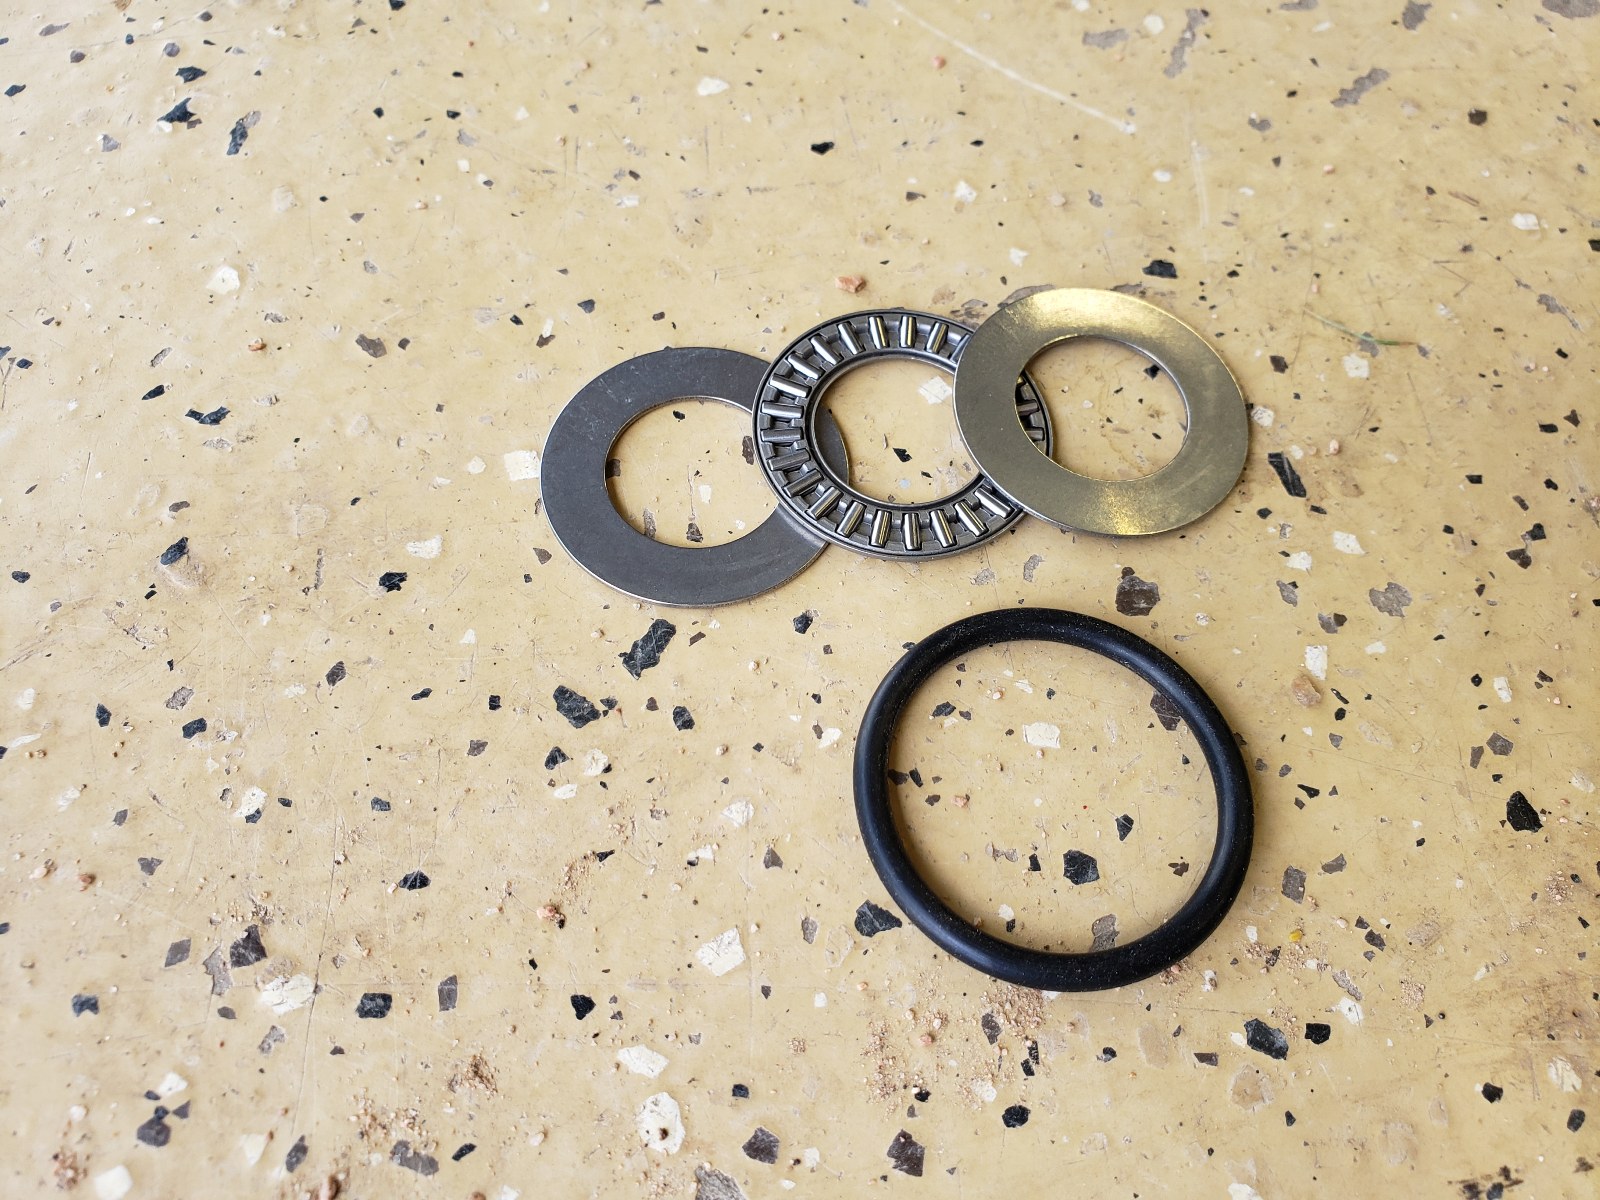 68 Thrust bearing, washers and o-ring dust seal.jpg